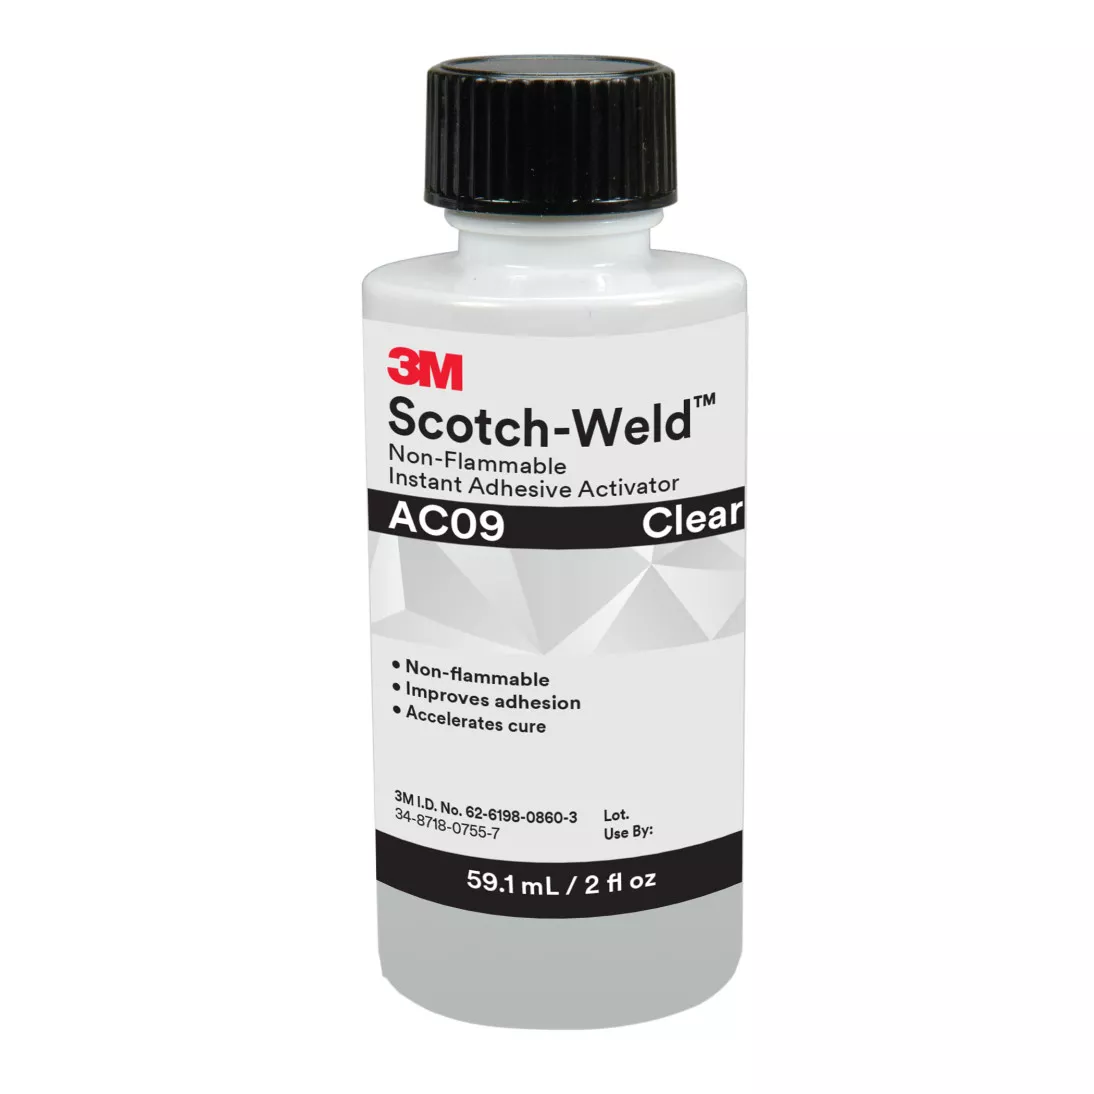 3M™ Scotch-Weld™ Non-Flammable Instant Adhesive Activator AC09, Clear, 2
fl oz Bottle, 10/case